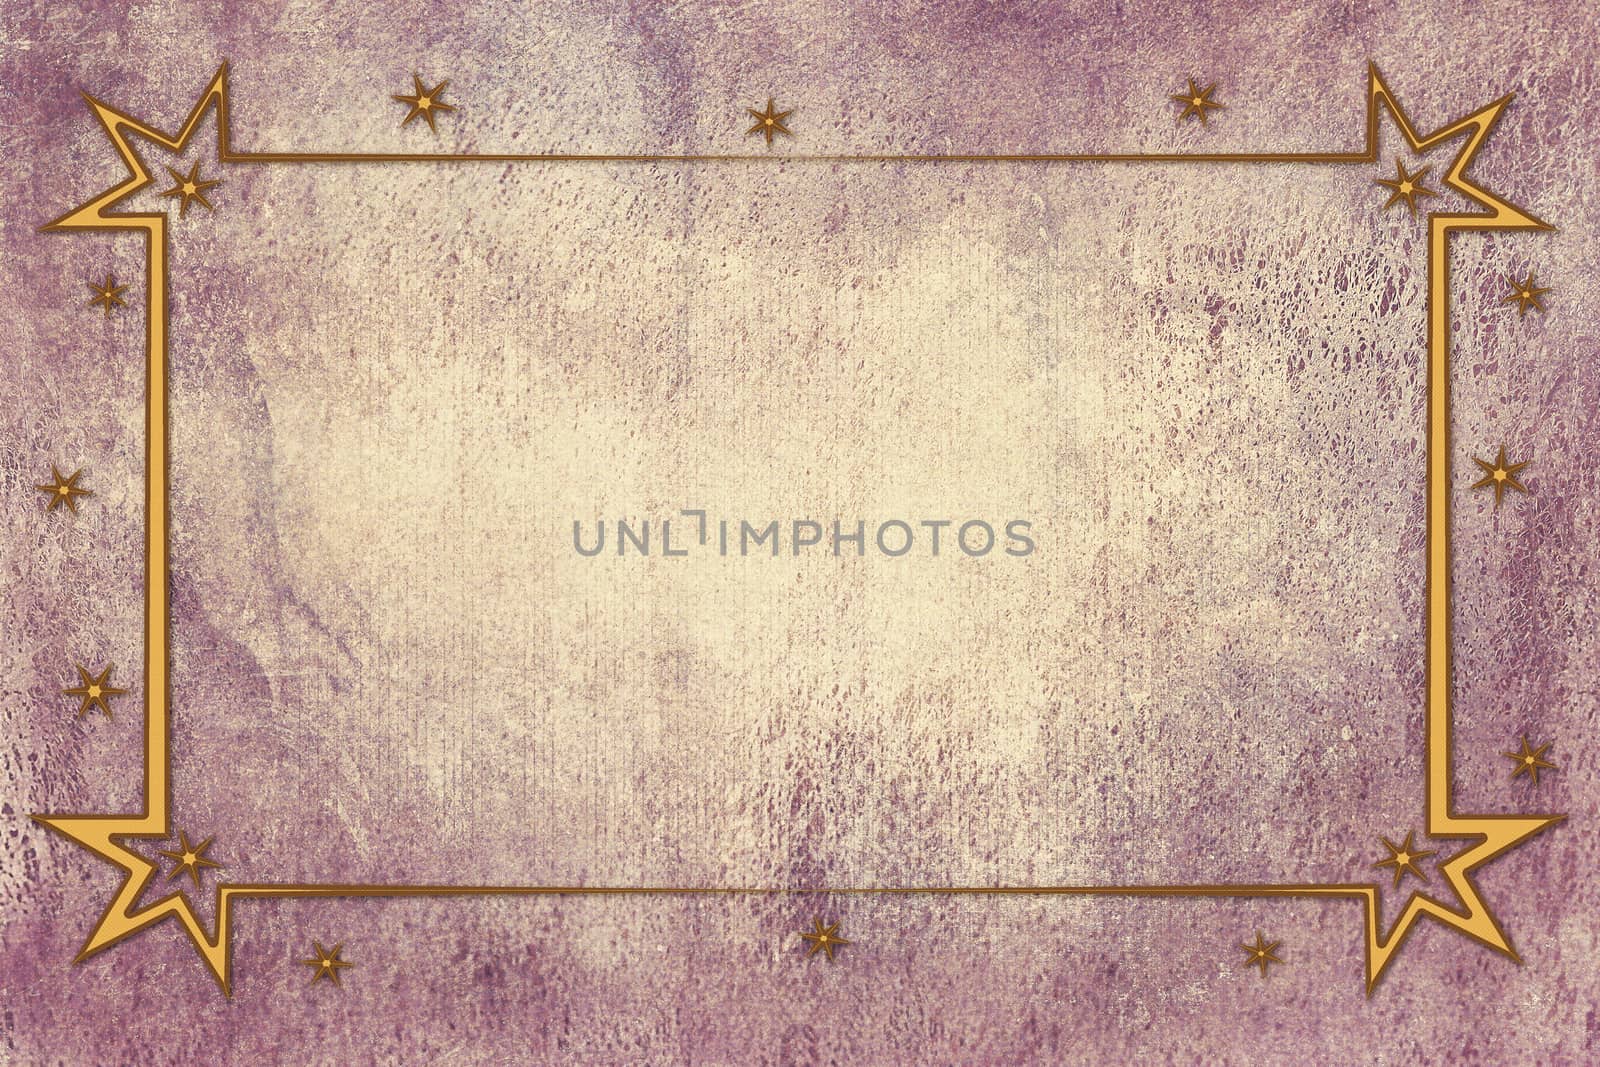 Antique Christmas Frame on Background With Texture by MaxalTamor